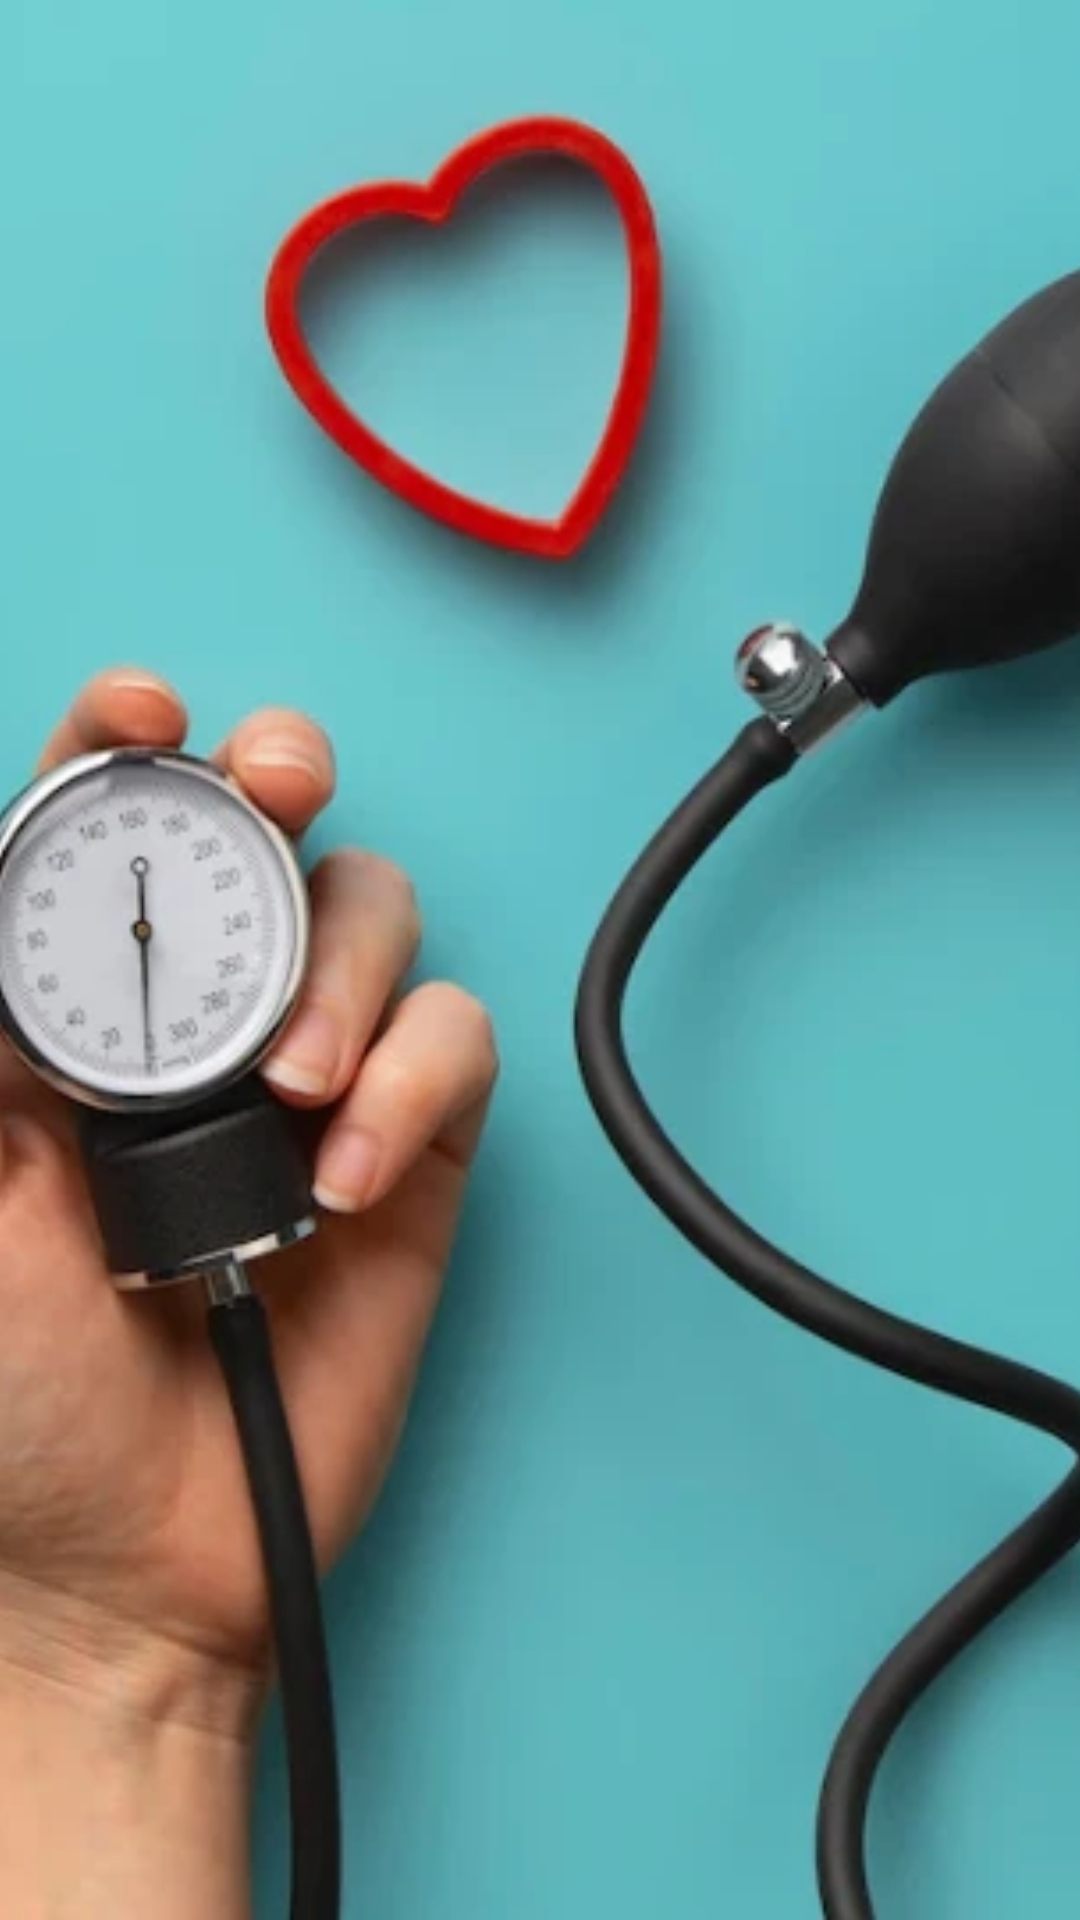 7 home remedies for low blood pressure​
